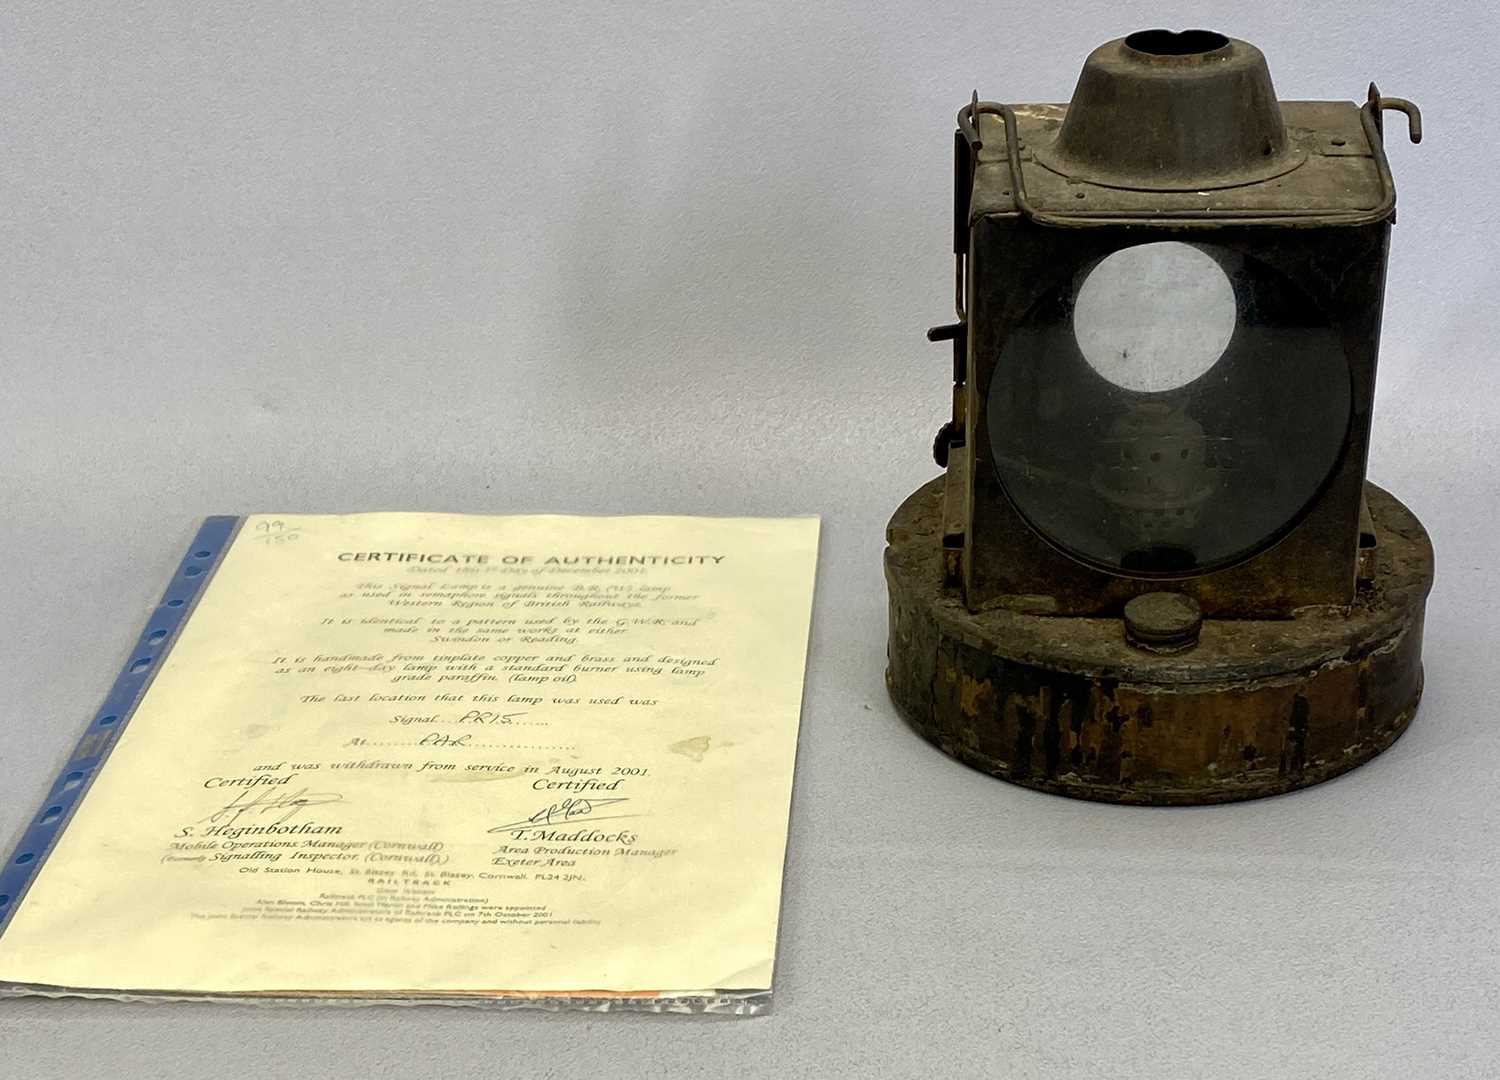 VINTAGE RAILWAY SIGNAL LAMP - tin plate, copper and brass, B.R.(W), 21cms H, with certificate of